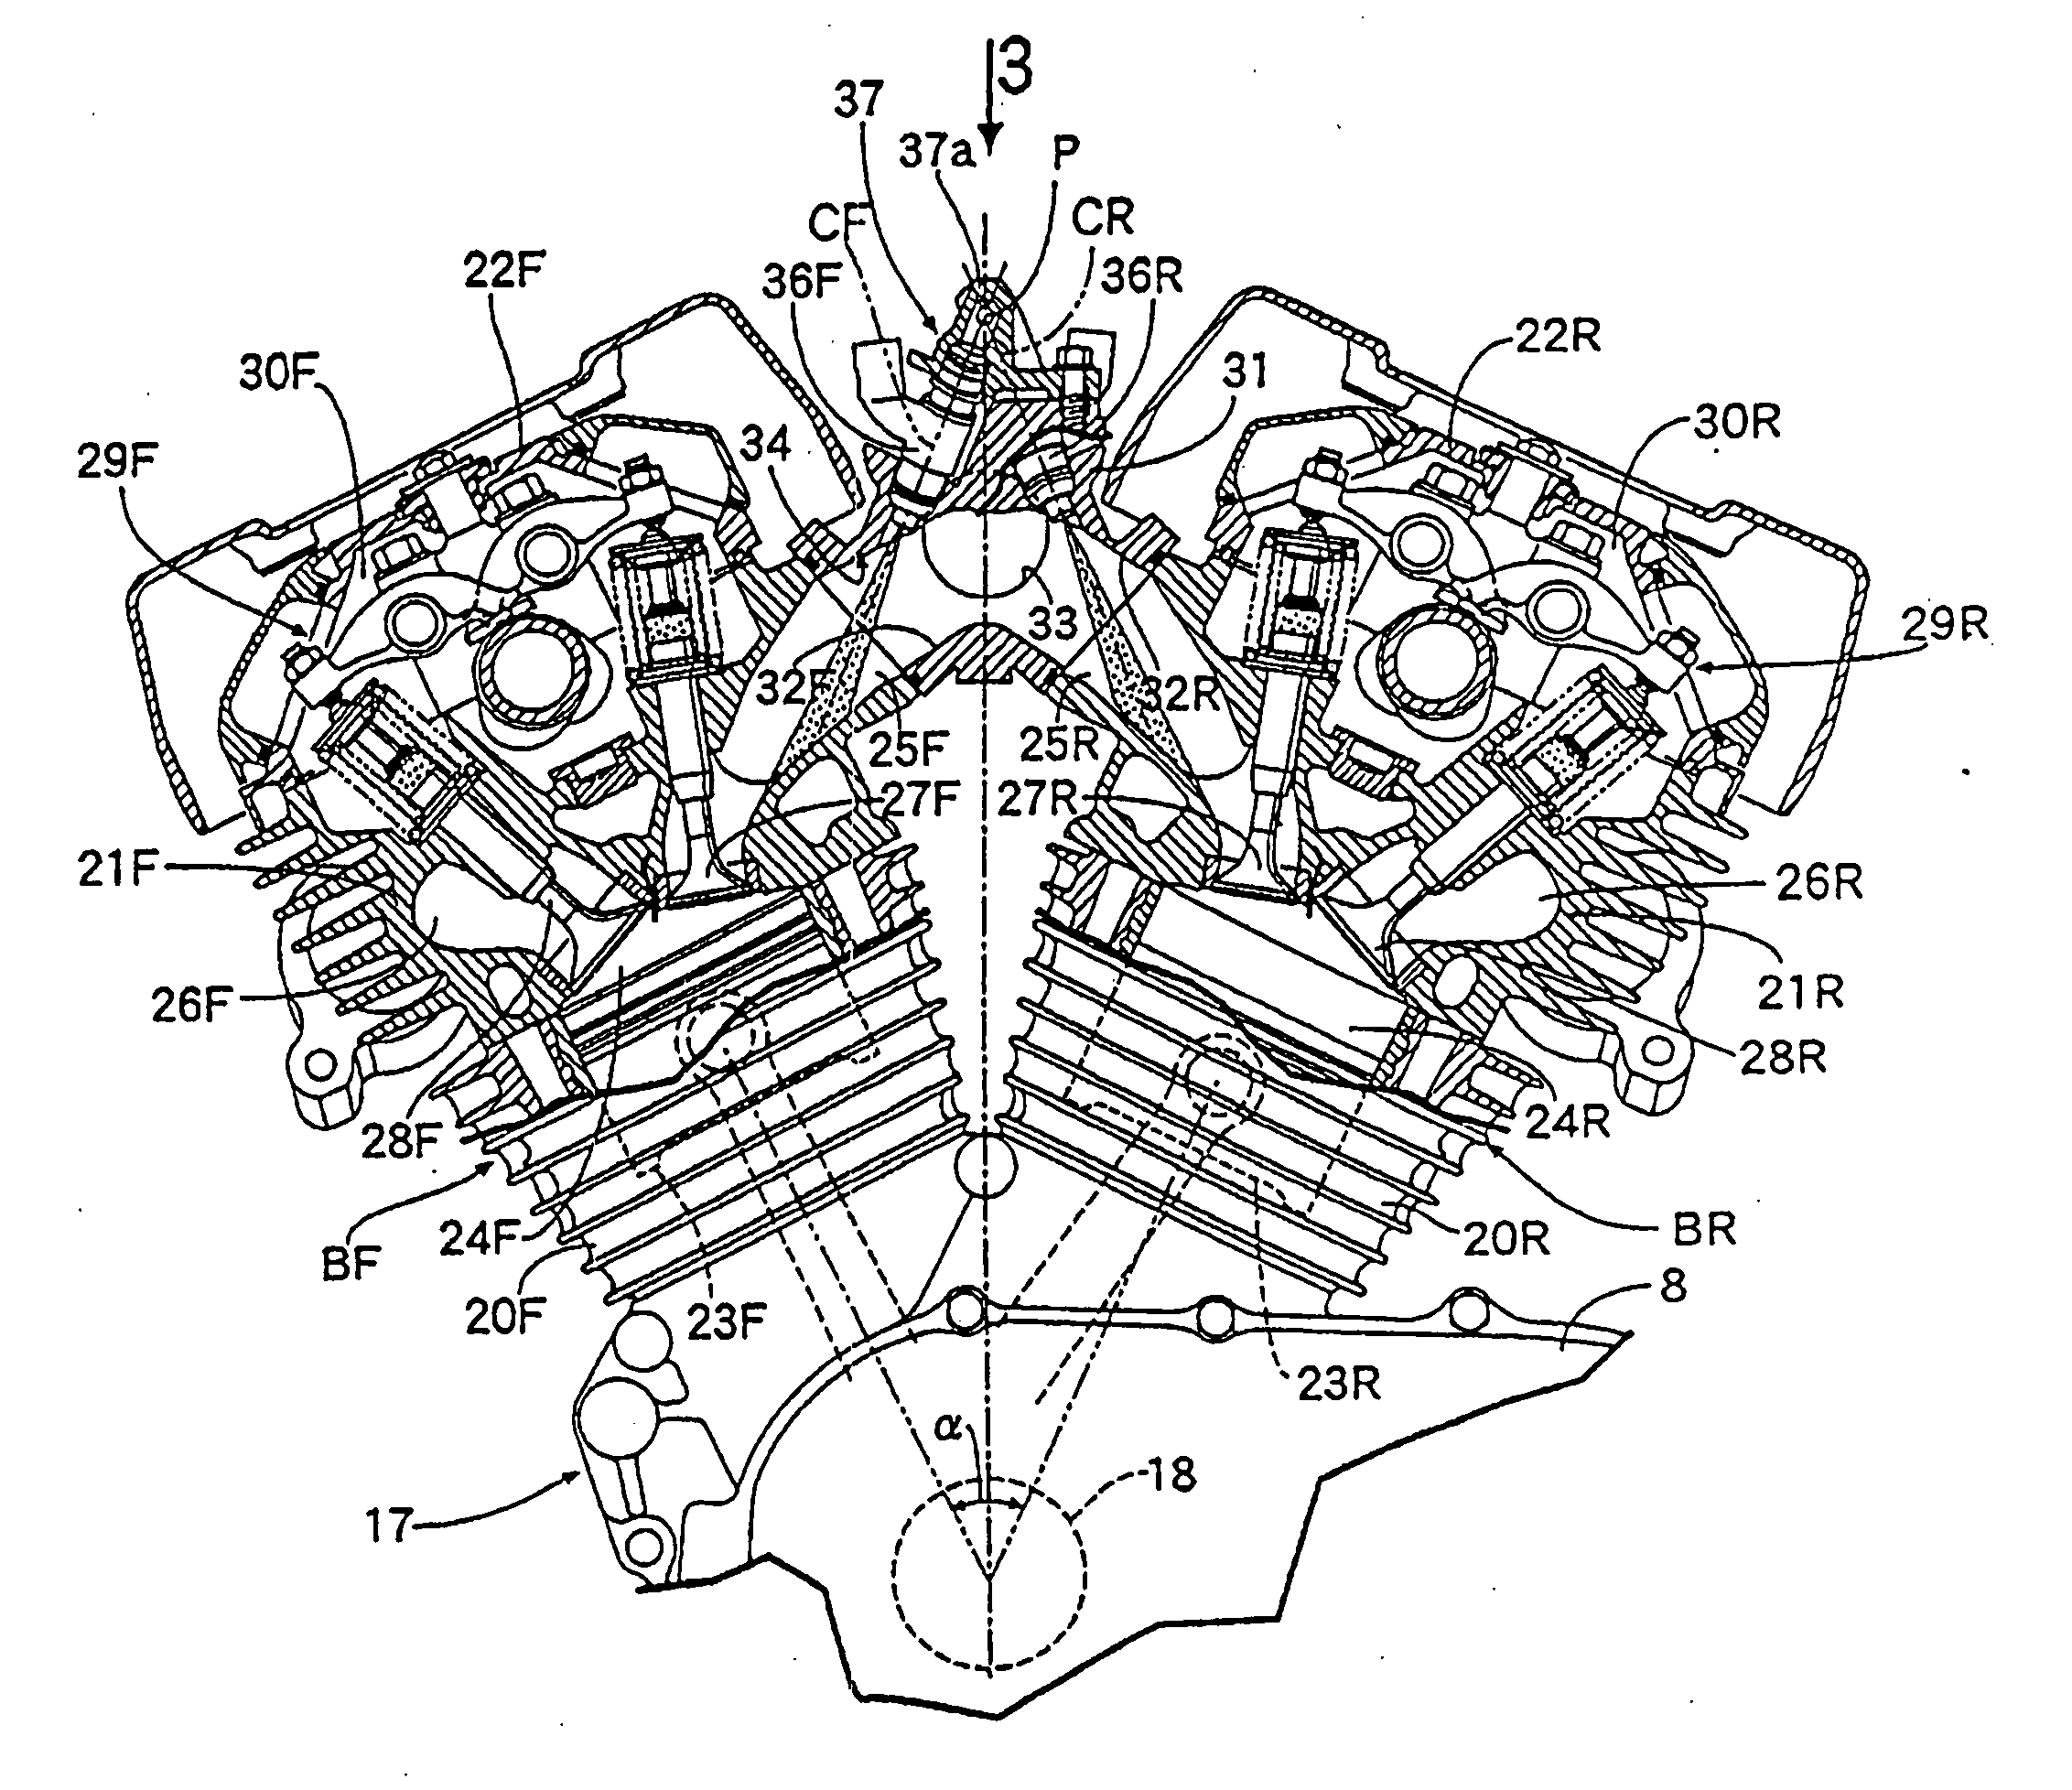 Fuel routing structure for a V-type engine